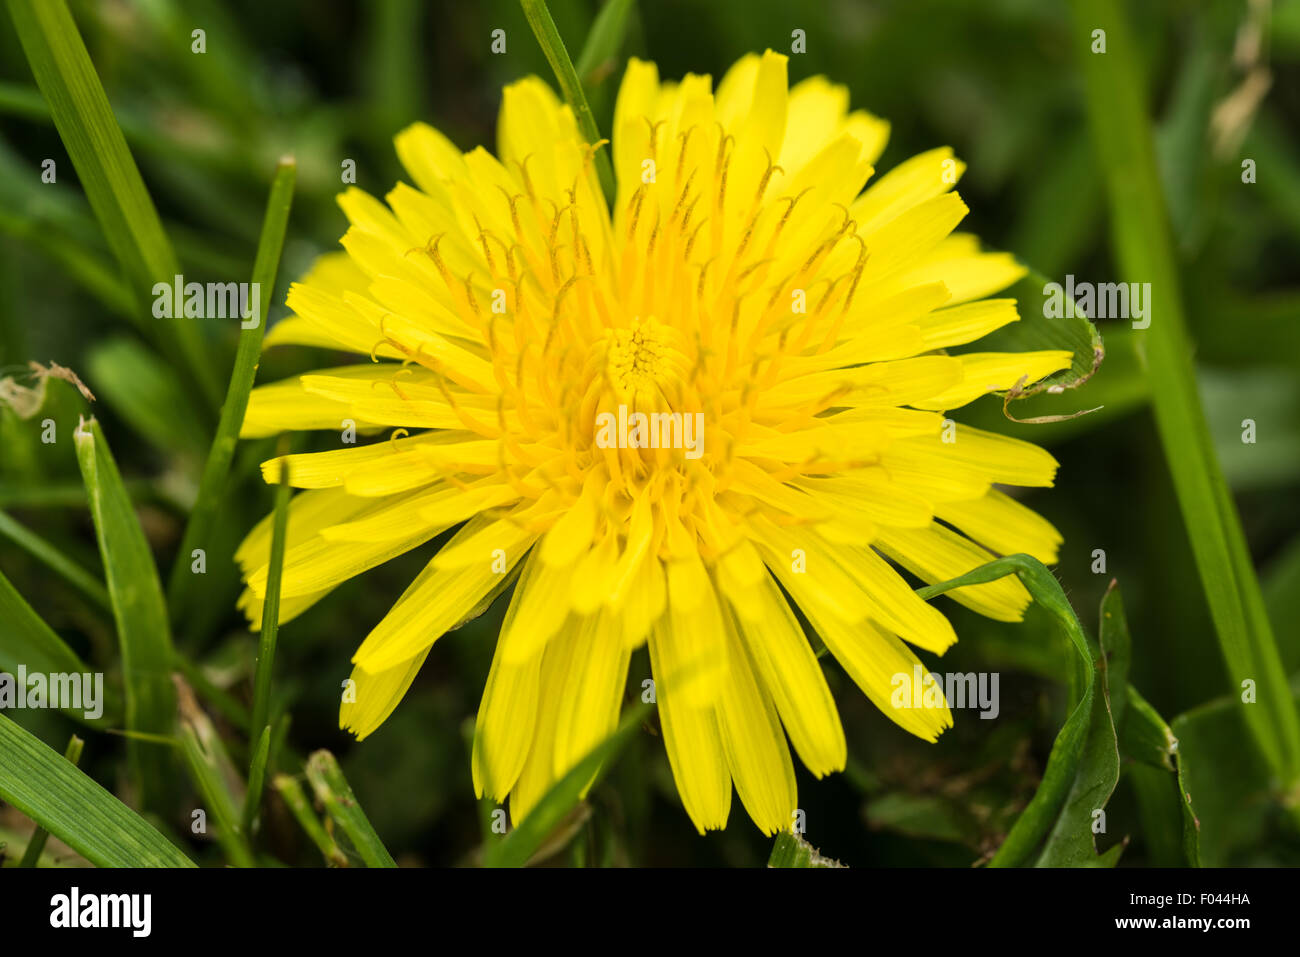 A  Dandelion in the undergrowth Stock Photo